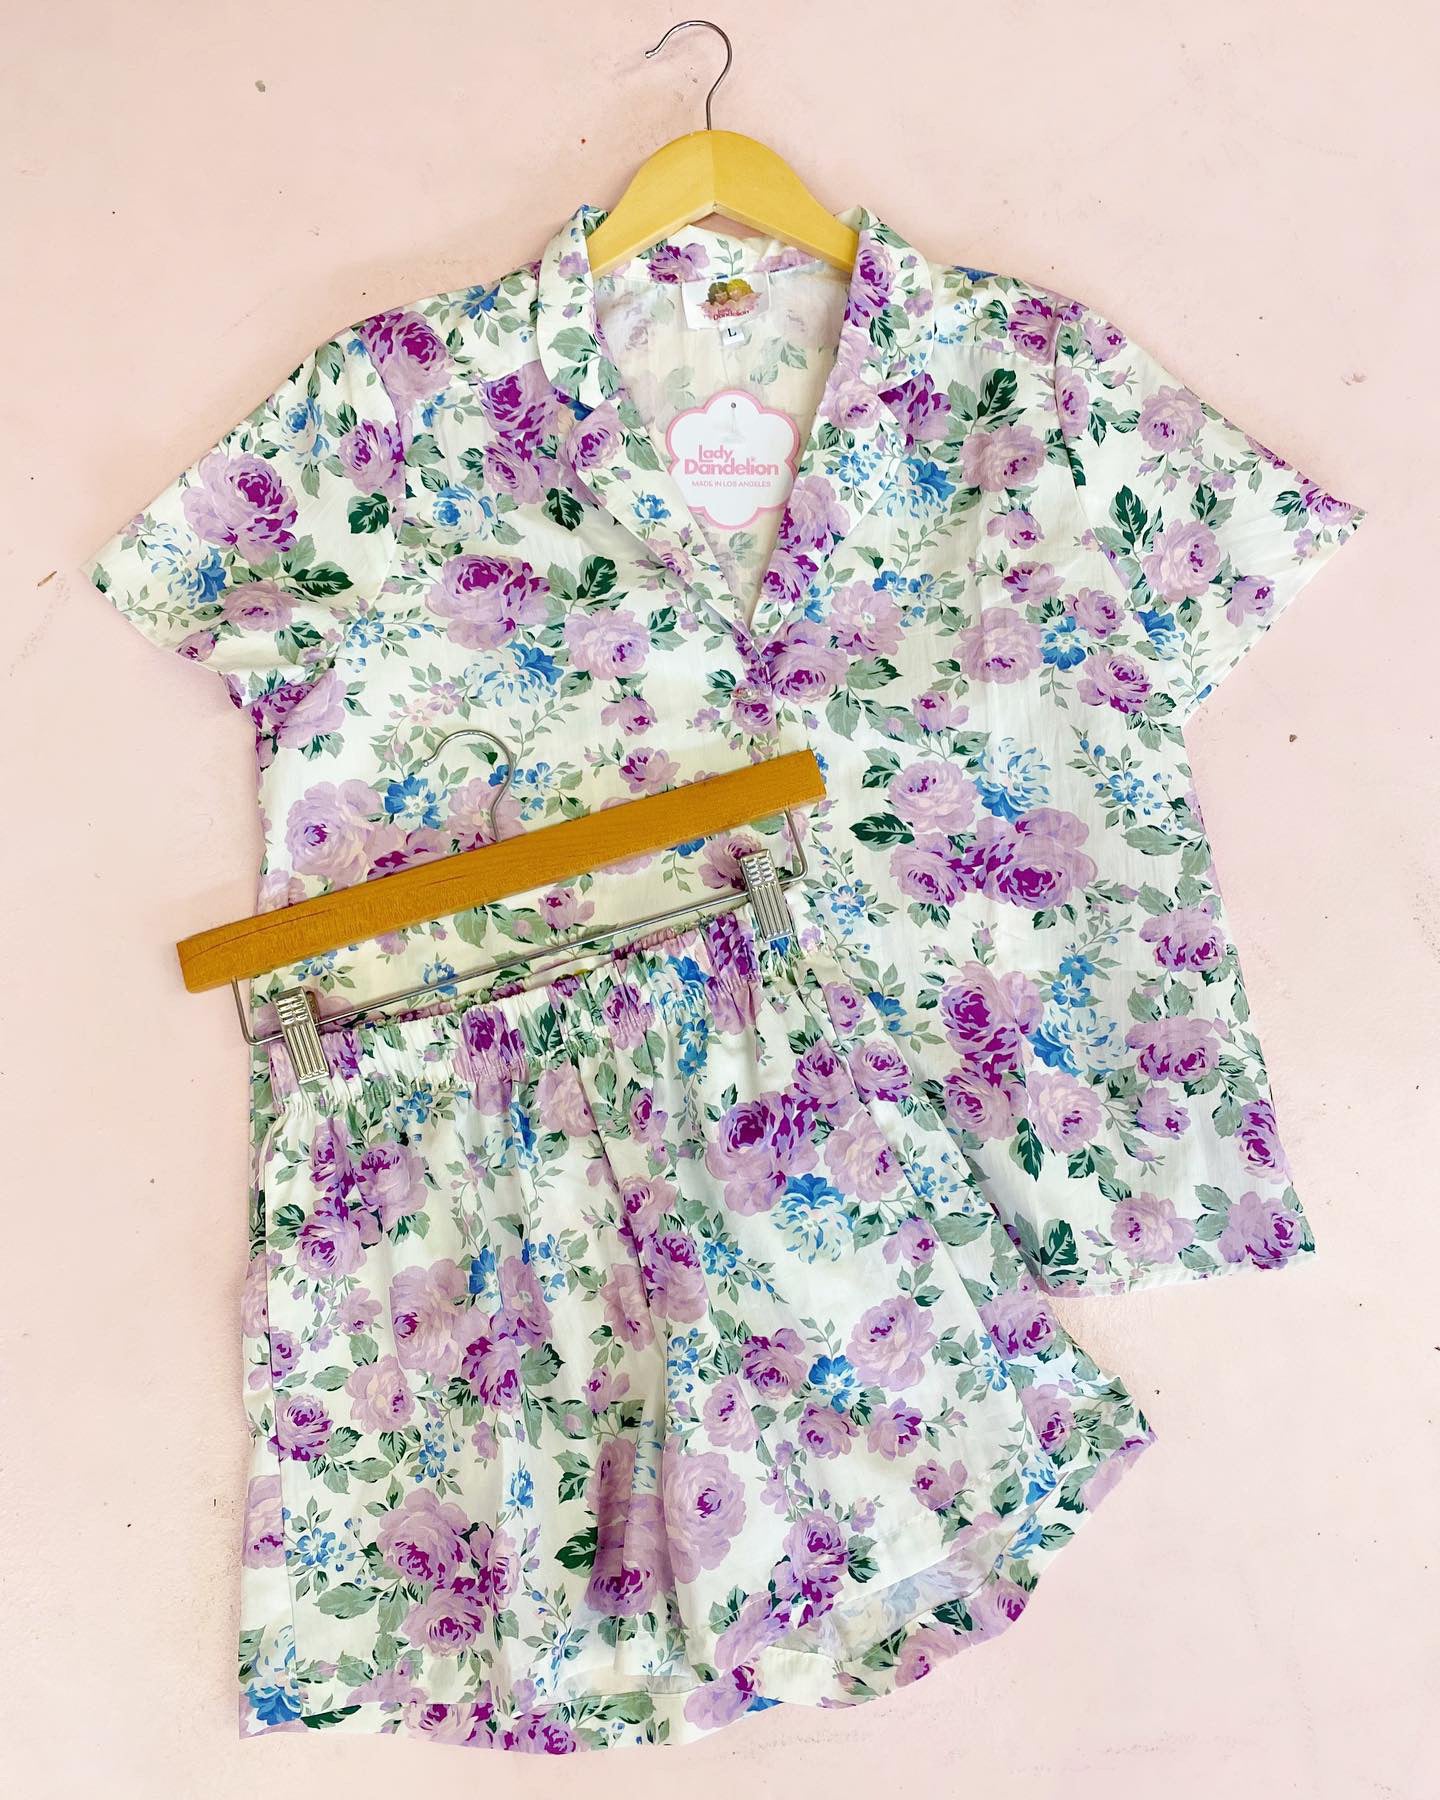 Camp Shirt - Shabby Chic Floral